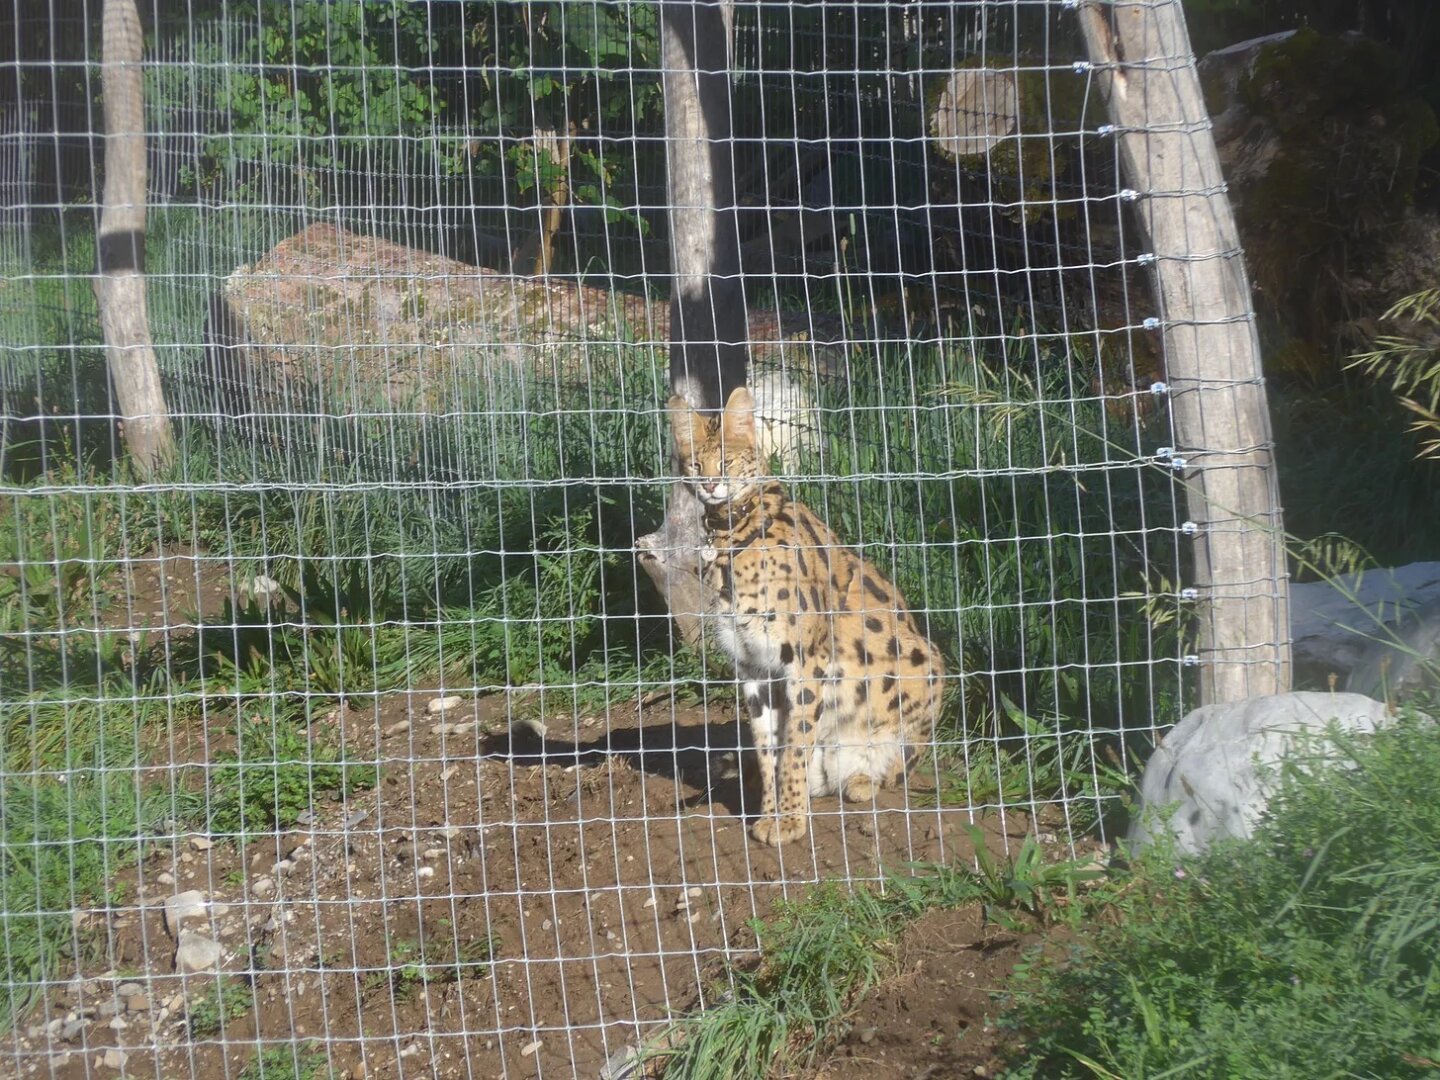 an image or two from my Pixelfed, shows a serval enjoying some sun in a sad cage